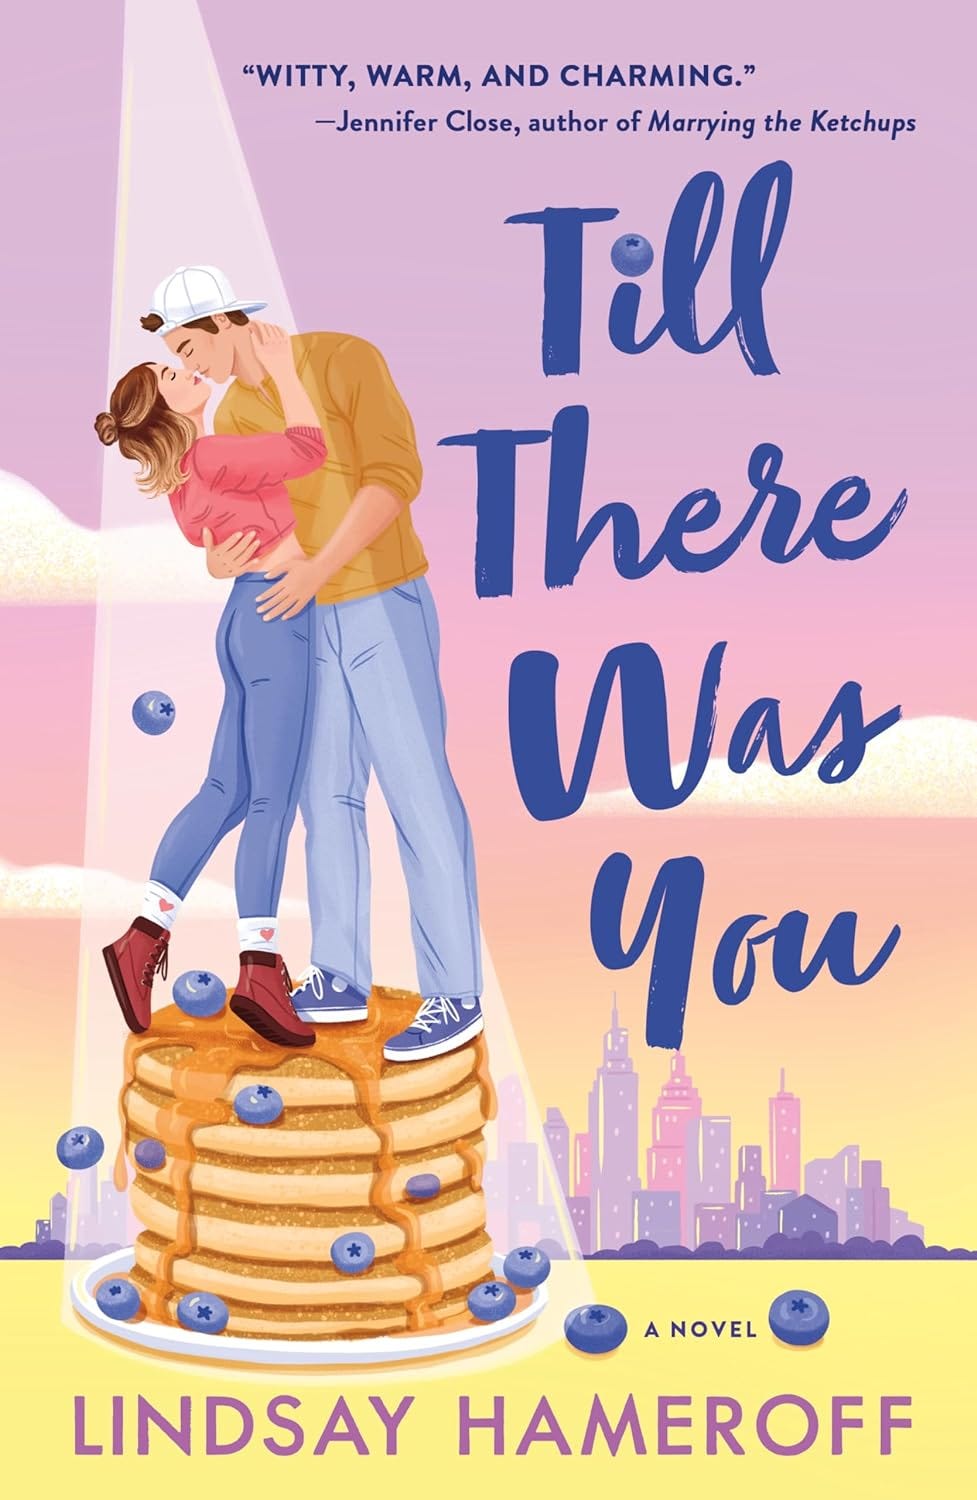 copy of Till There Was You by Lindsay Hameroff, showing a white couple embracing and about to kiss standing on a stack of blueberry pancakes, and then the title in a cute font with a blueberry over the i